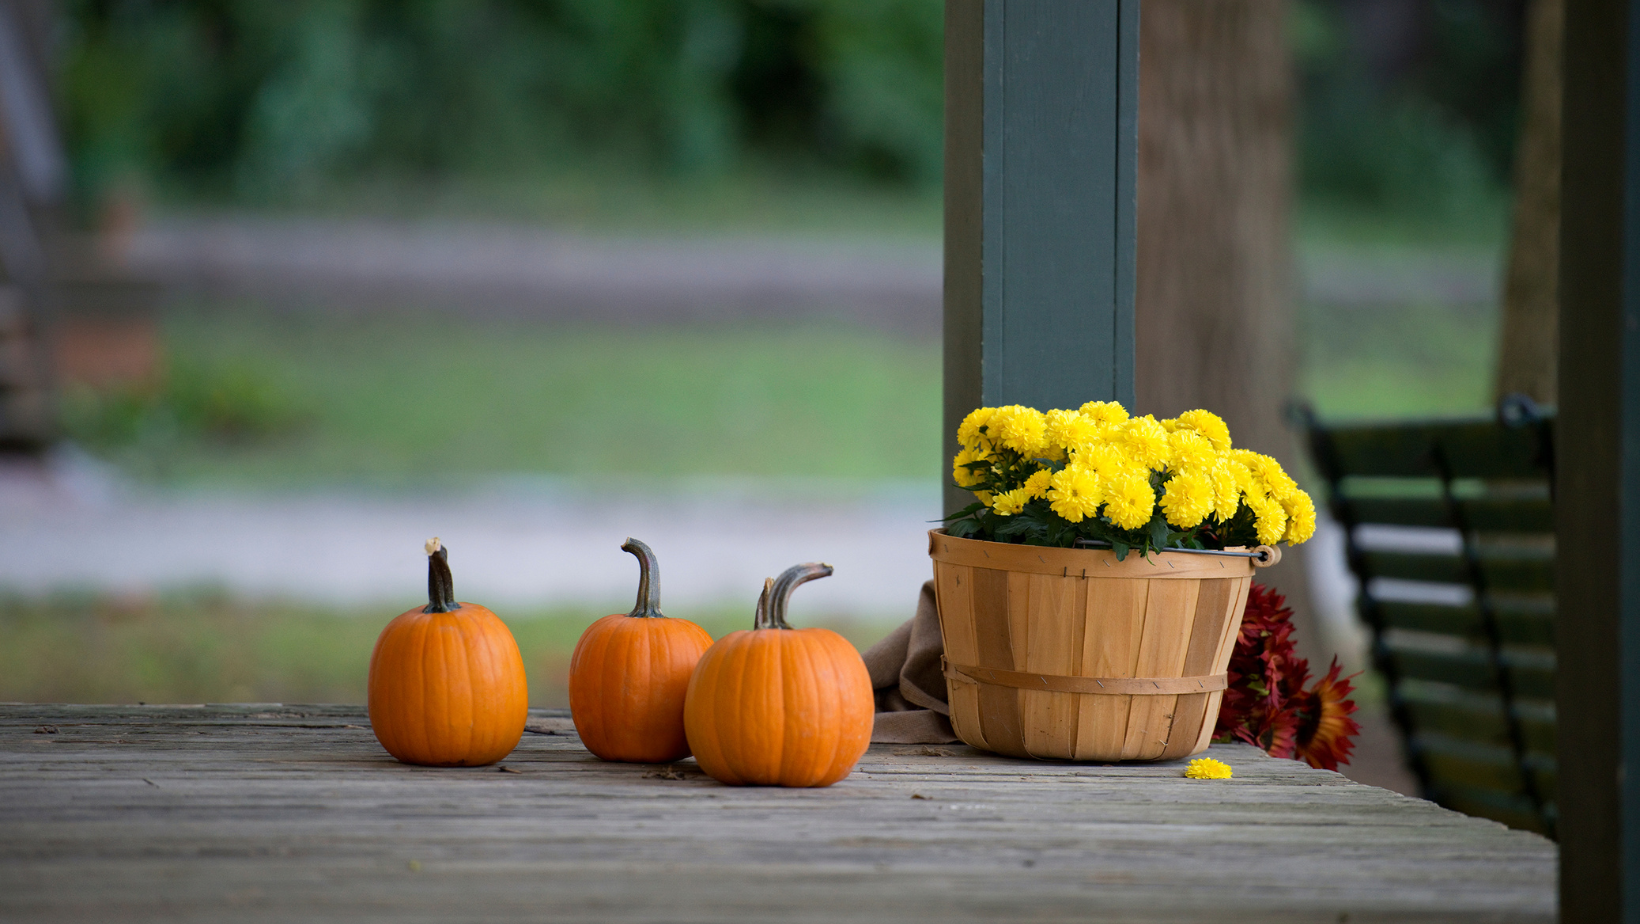 A Vermont porch with three pumpkins and bright yellow flowers in a wooden basket.